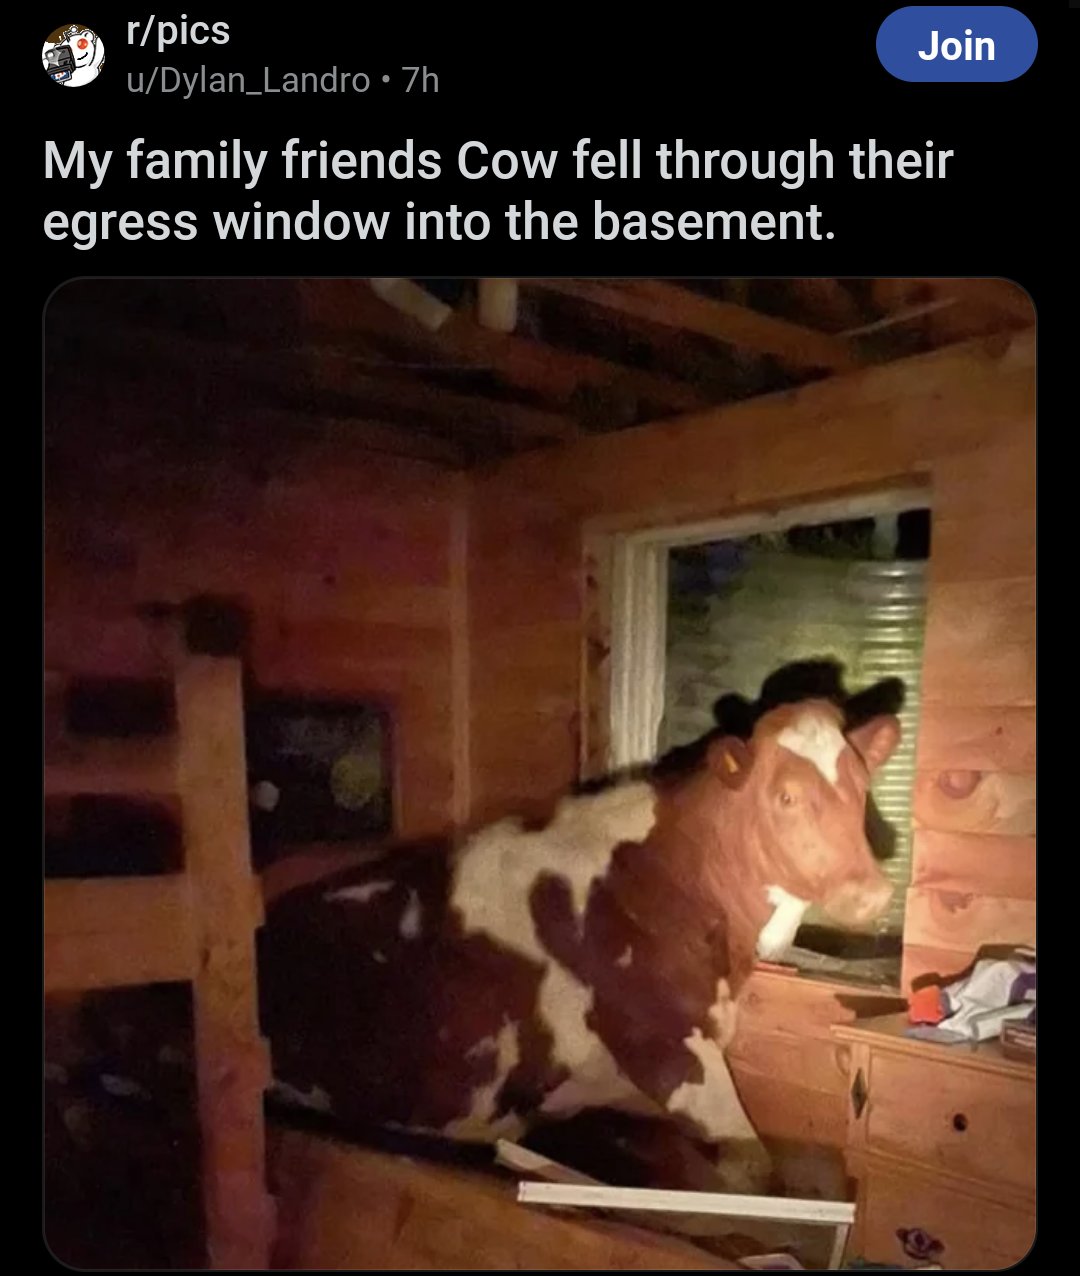 screenshot - rpics uDylan_Landro .7h Join My family friends Cow fell through their egress window into the basement.